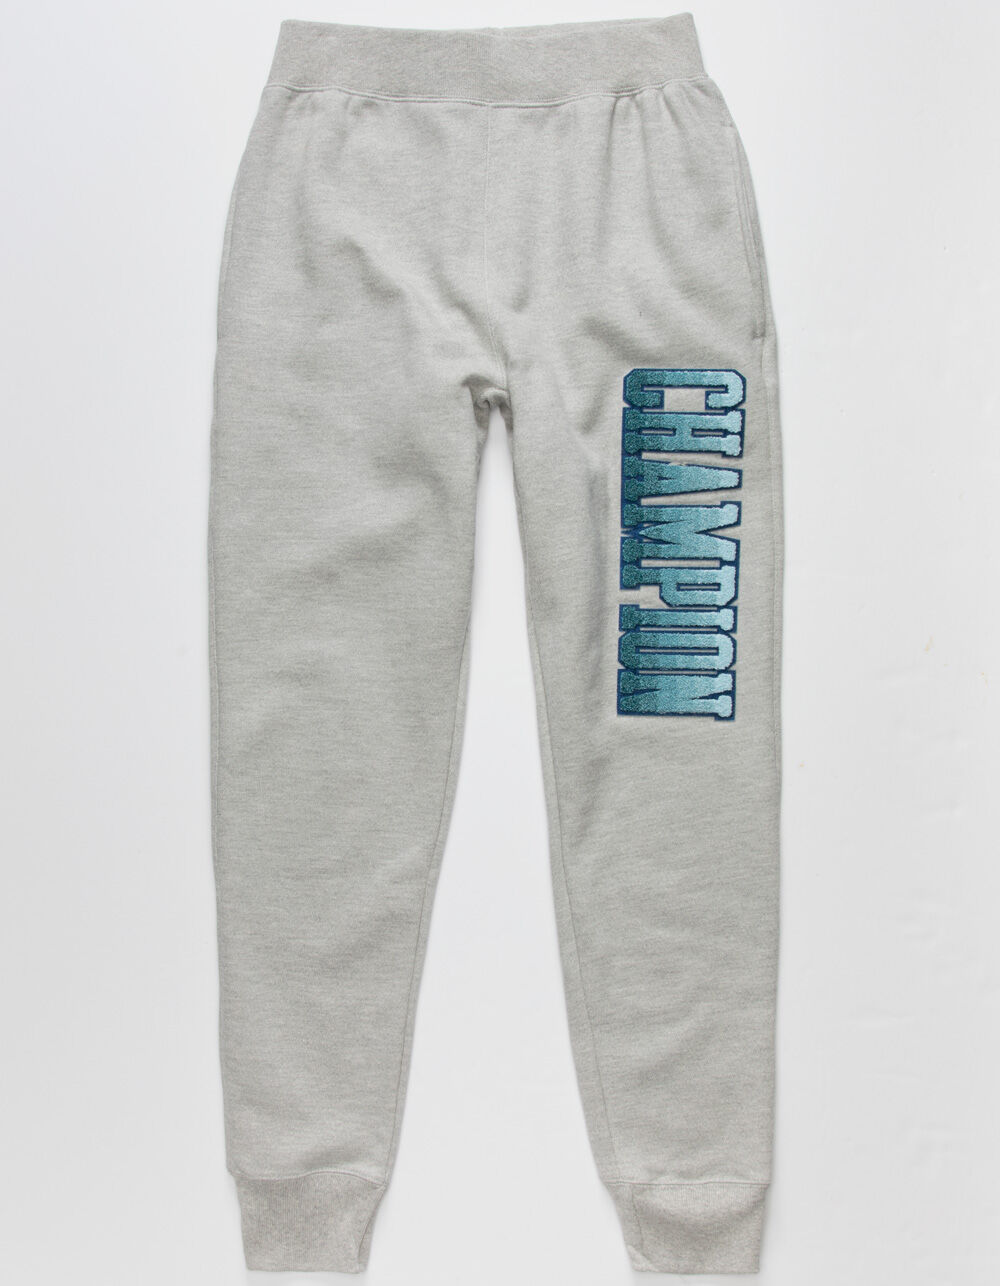 CHAMPION Chenille Ombre Mens Sweatpants - HEATHER GRAY | Tillys